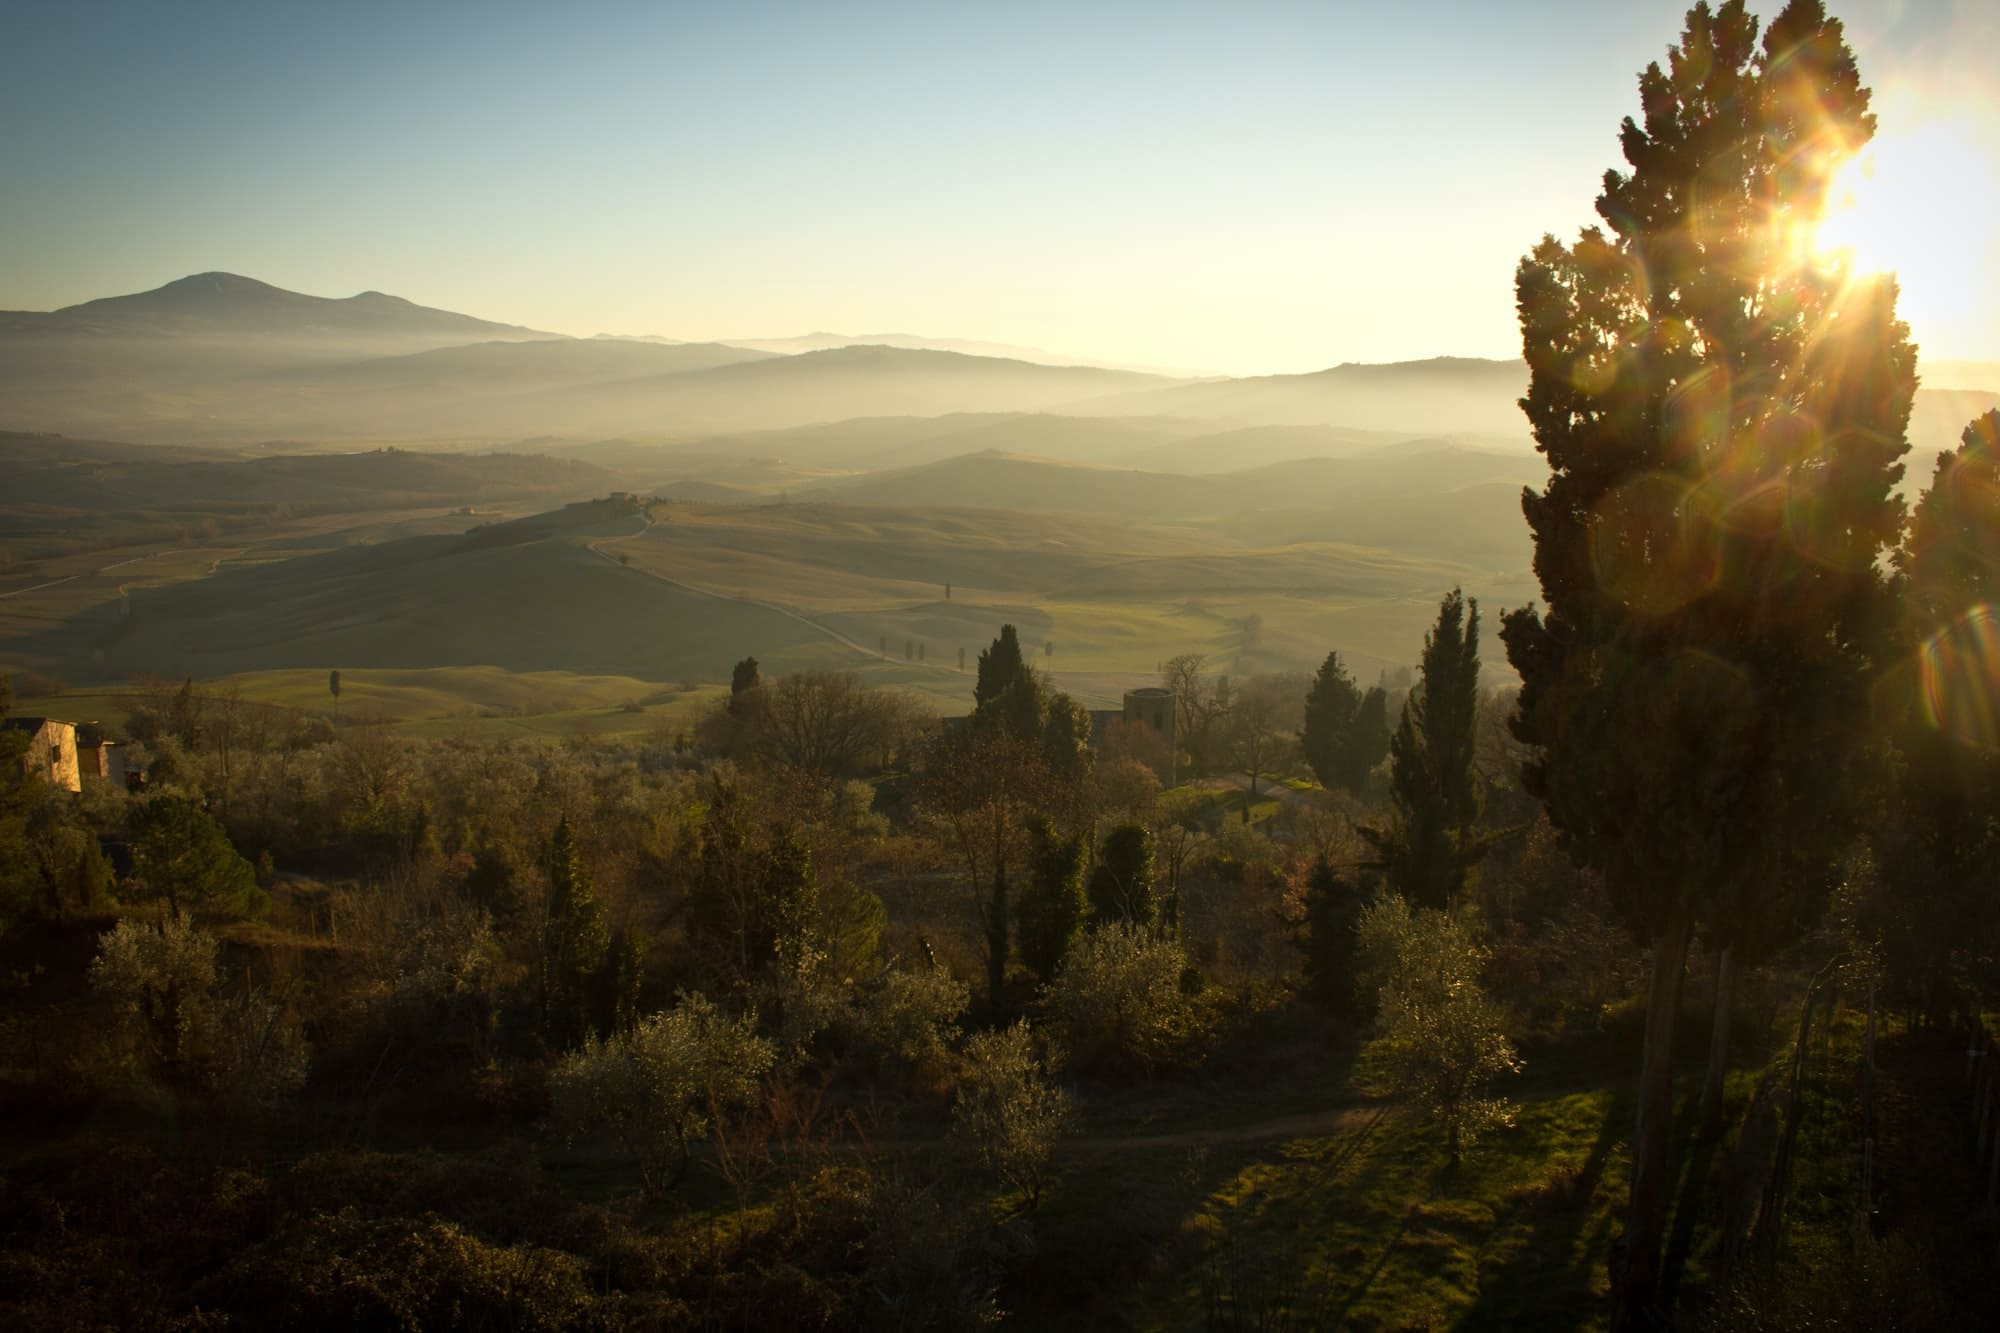 tuscany in the sunset